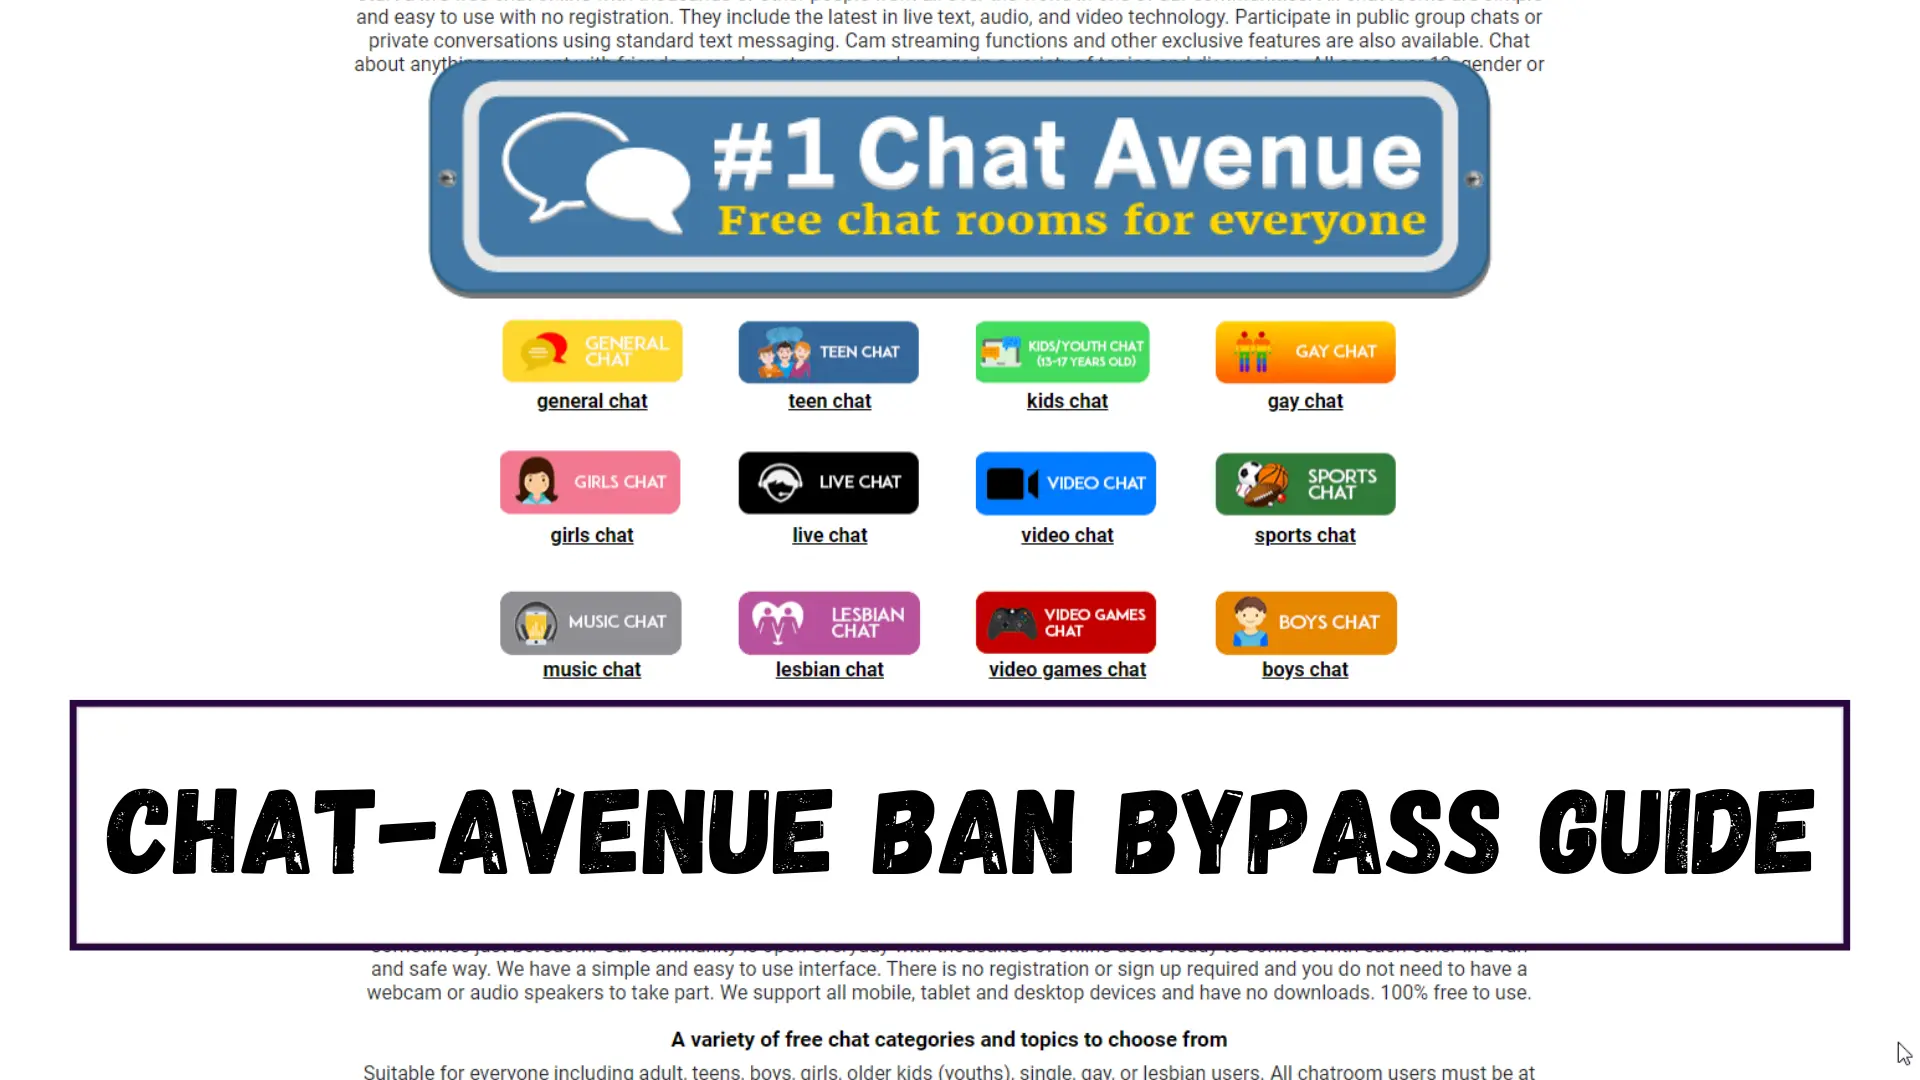 Chat-Avenue Ban Bypass